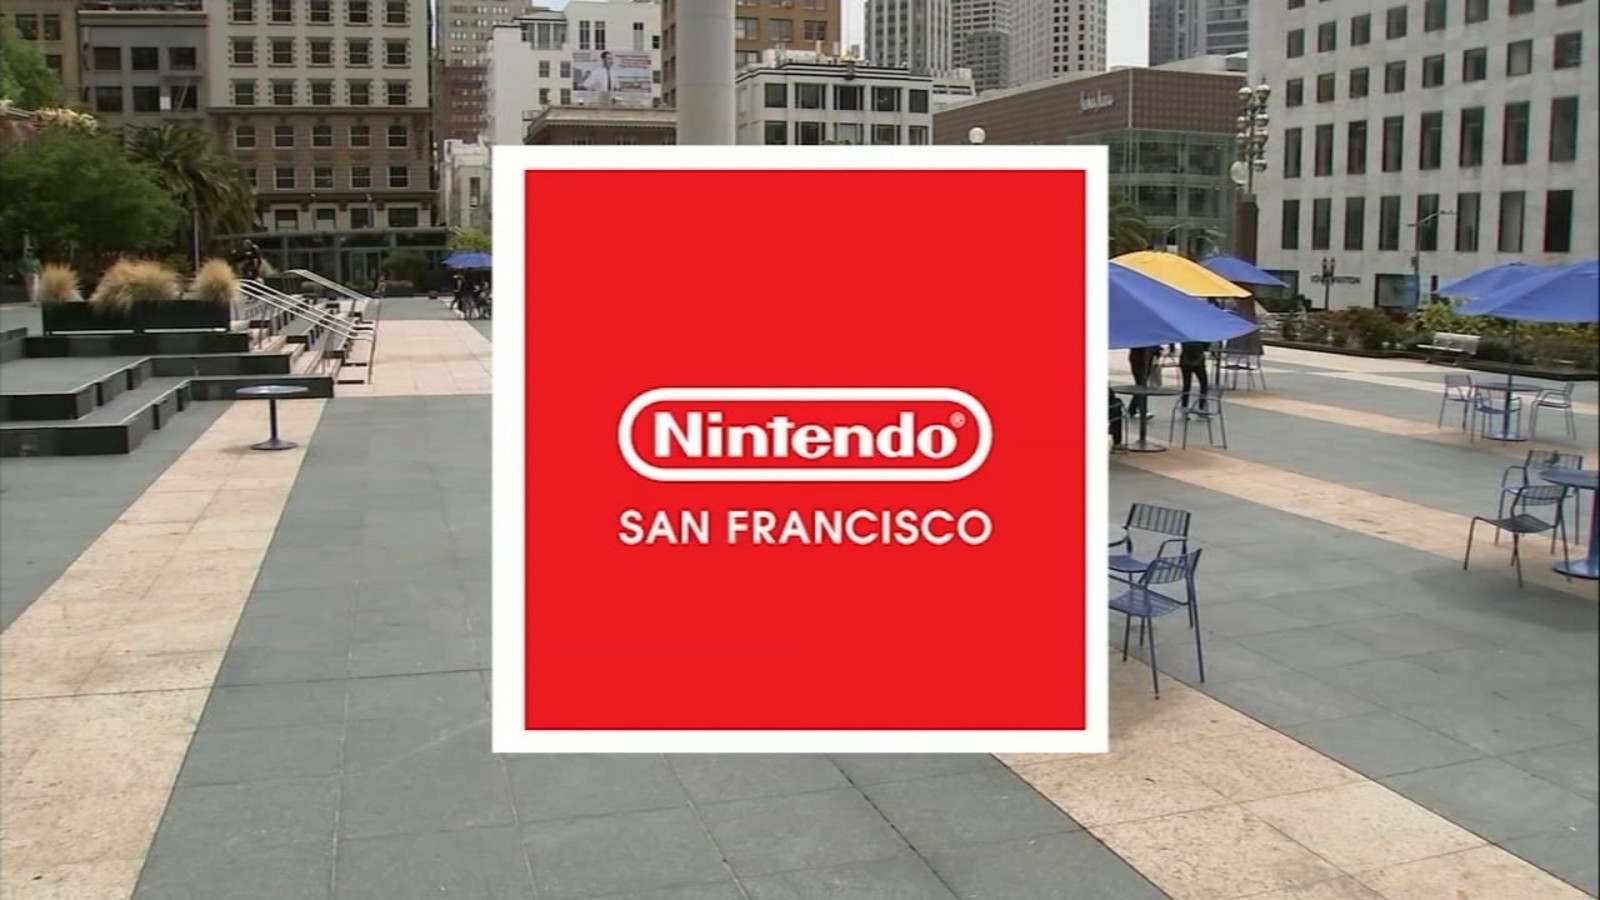 Nintendo store coming to SF in 2025. Expert reports promising trend of new businesses opening